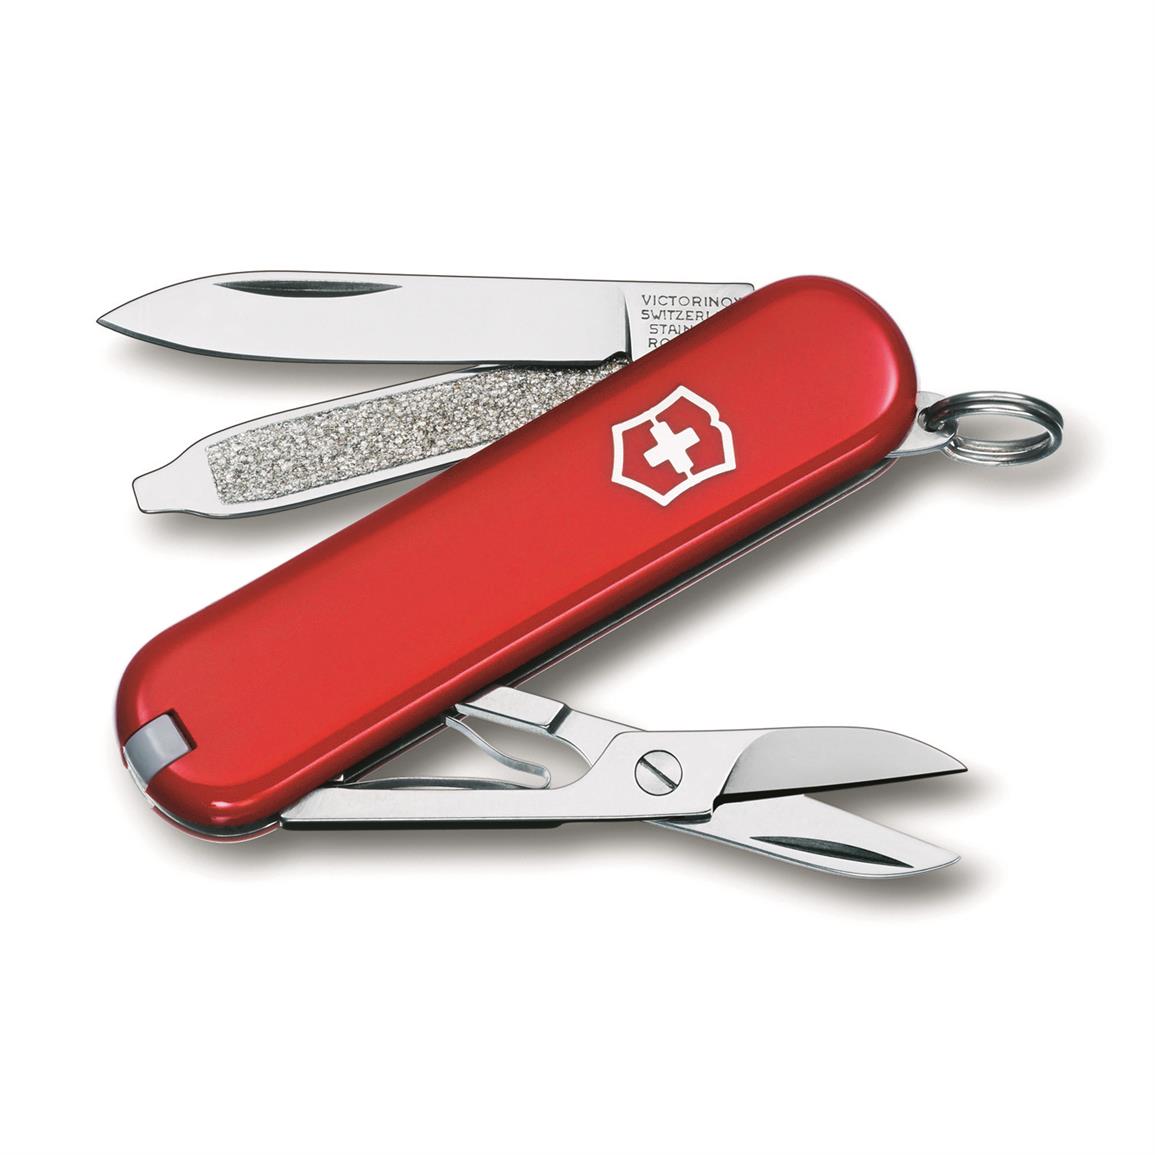 Victorinox Swiss Army Classic SD Pocket Knife - 673923, Multi-Tools at Sportsman's Guide